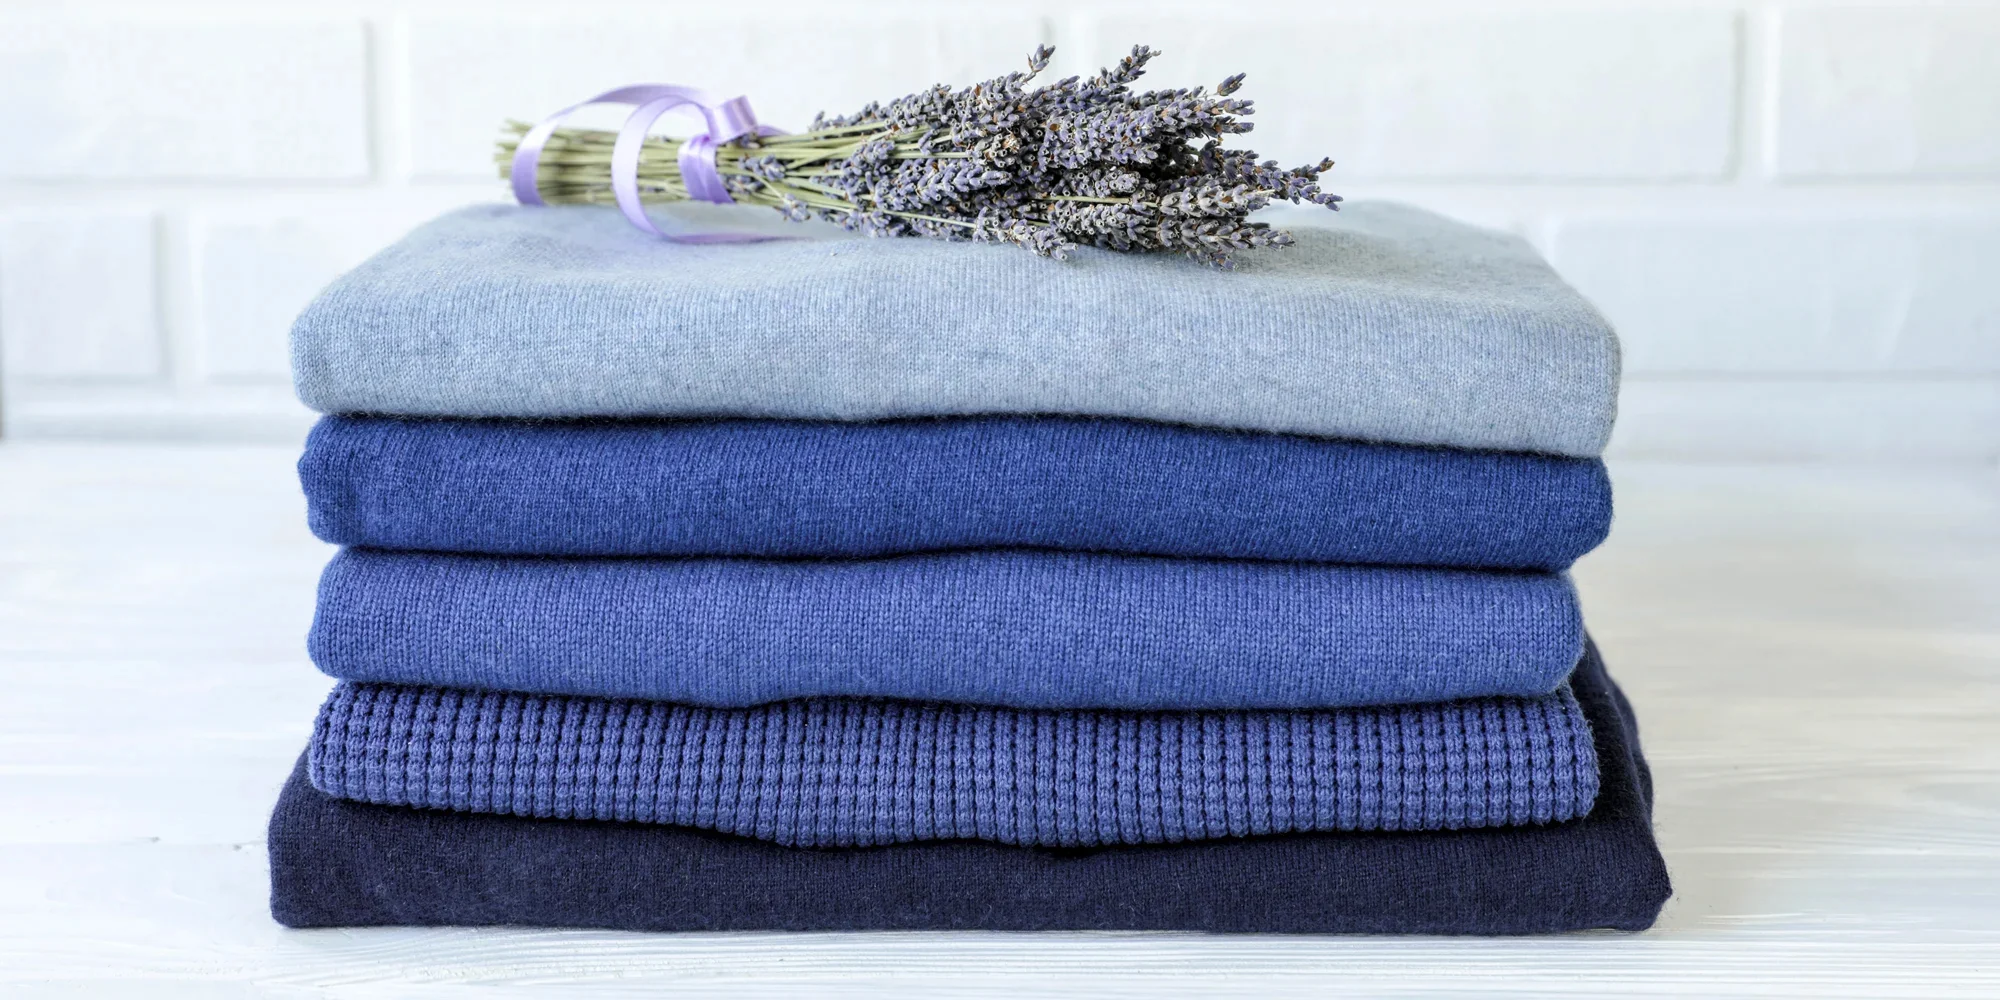 3 Ways to Store Cashmere - The Tech Edvocate